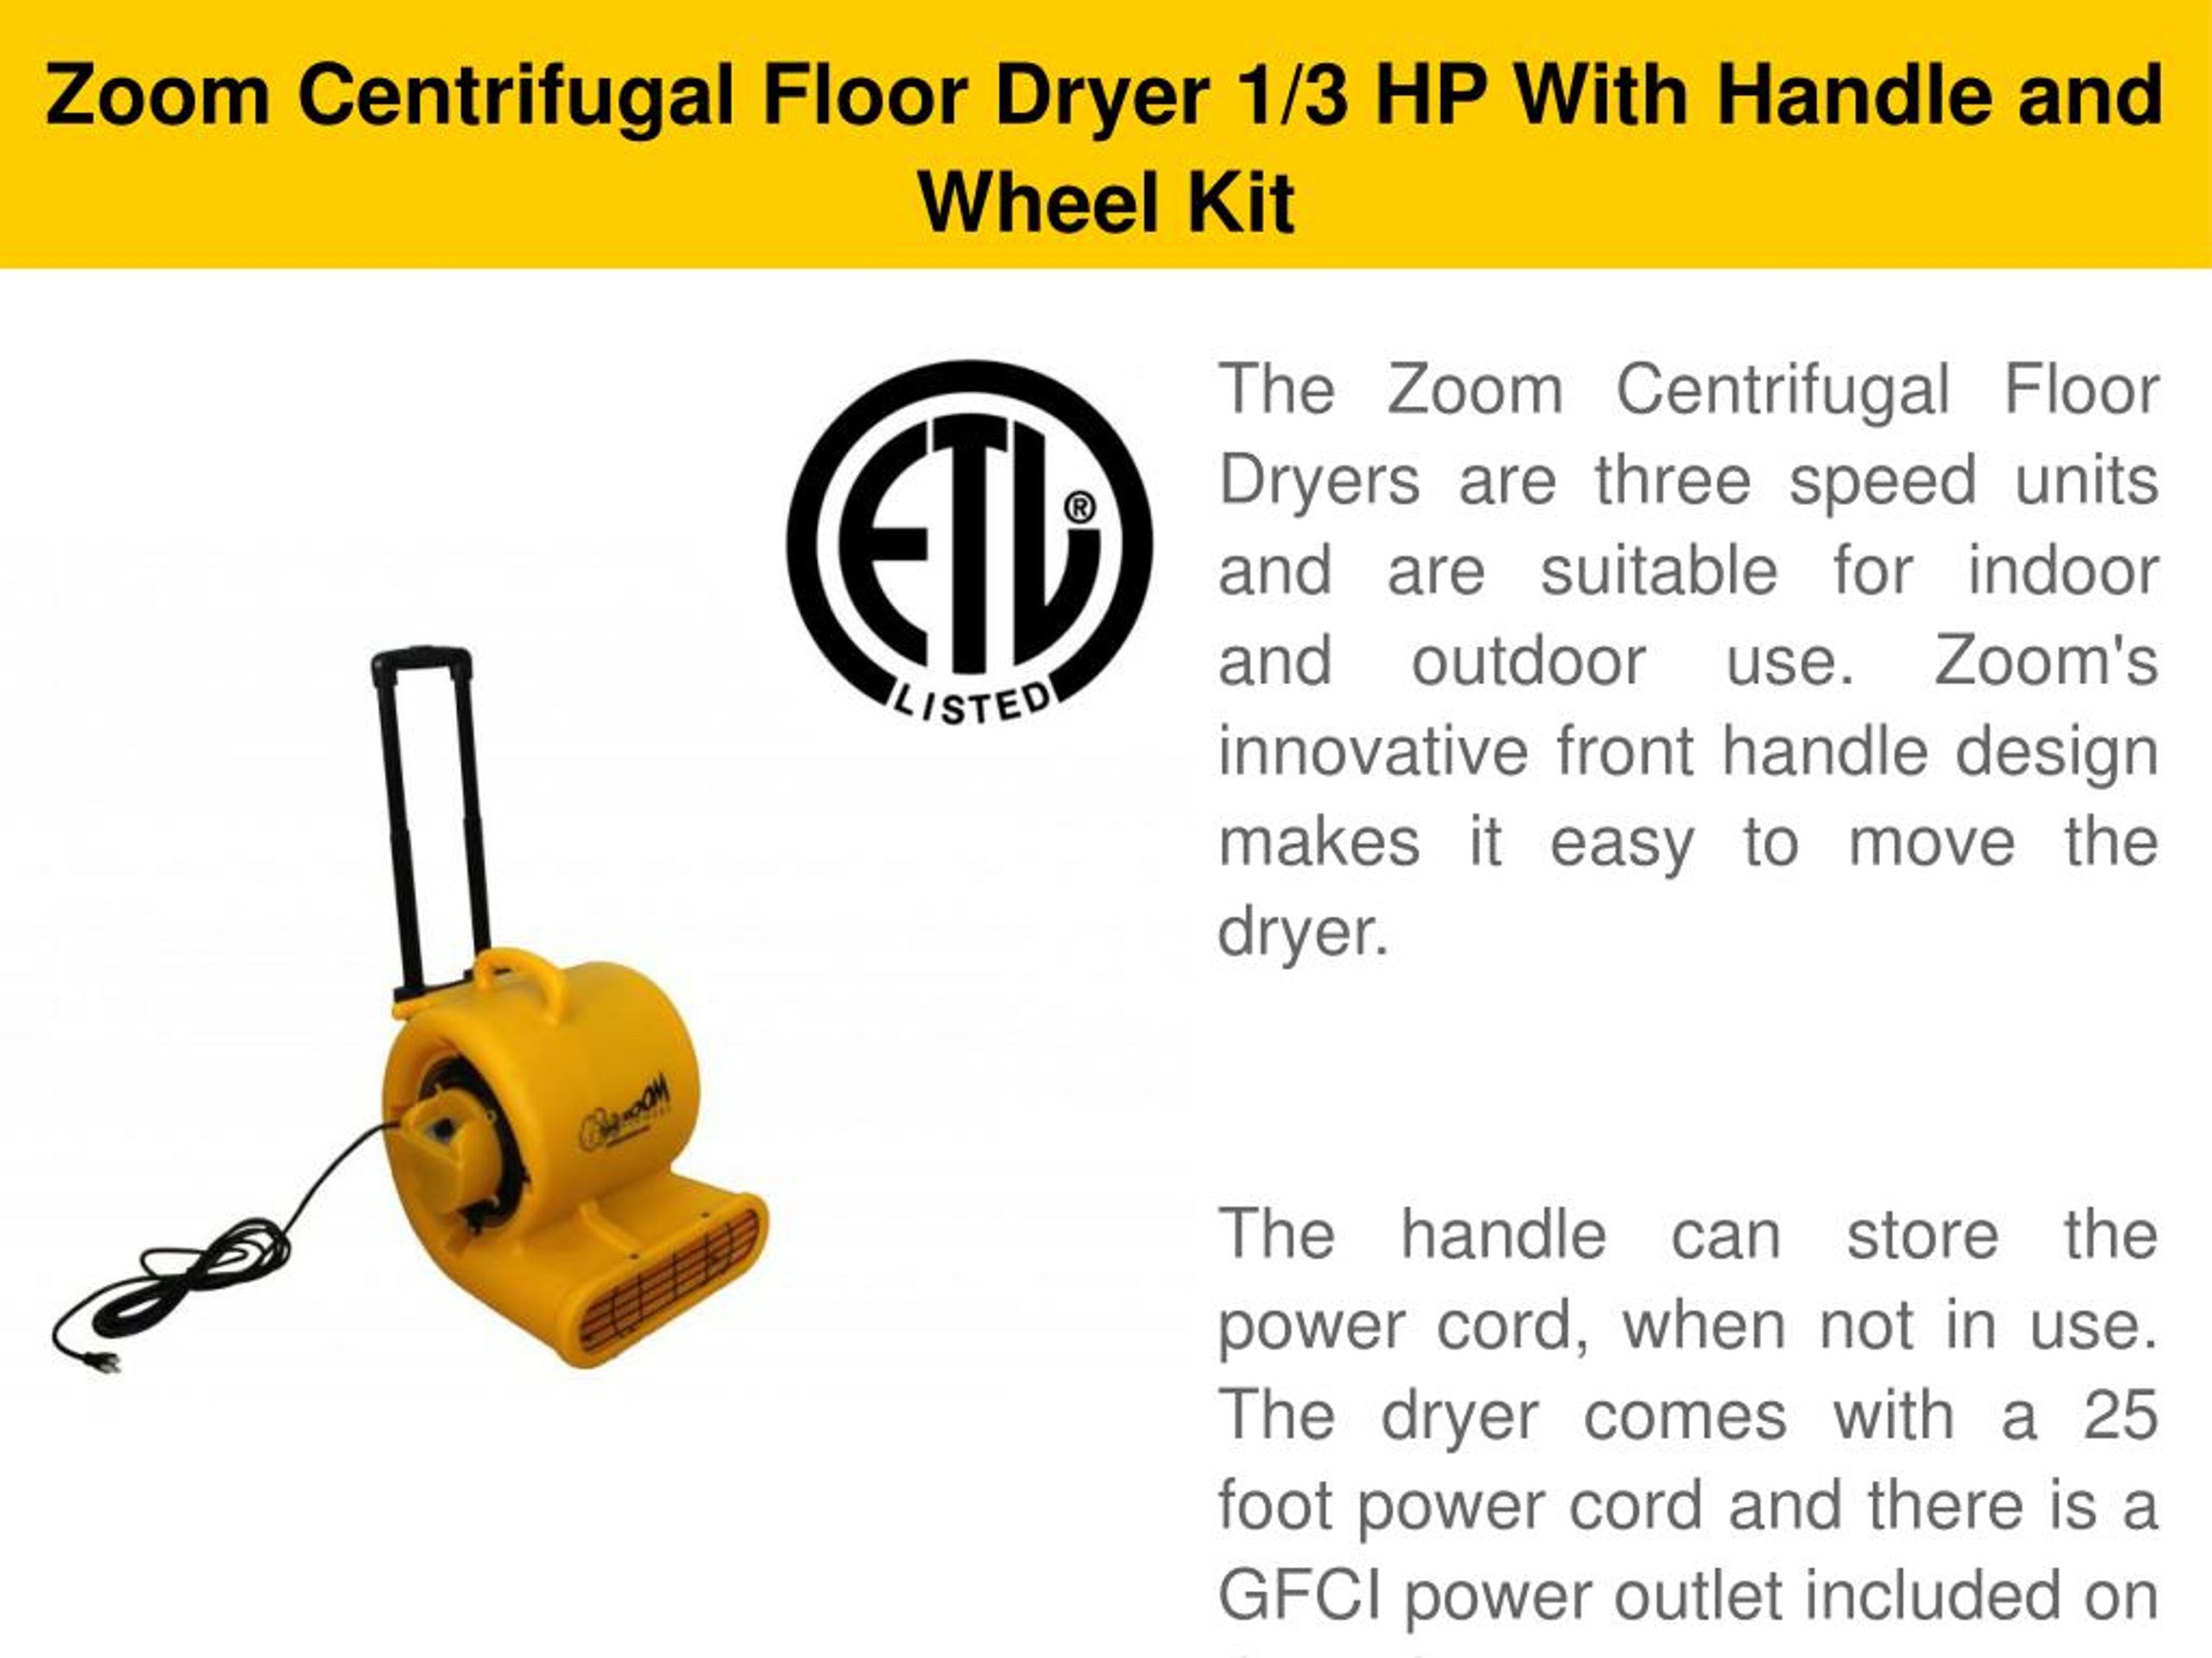 Zoom 1/3 HP Centrifugal Floor Dryer with Carpet Clamp